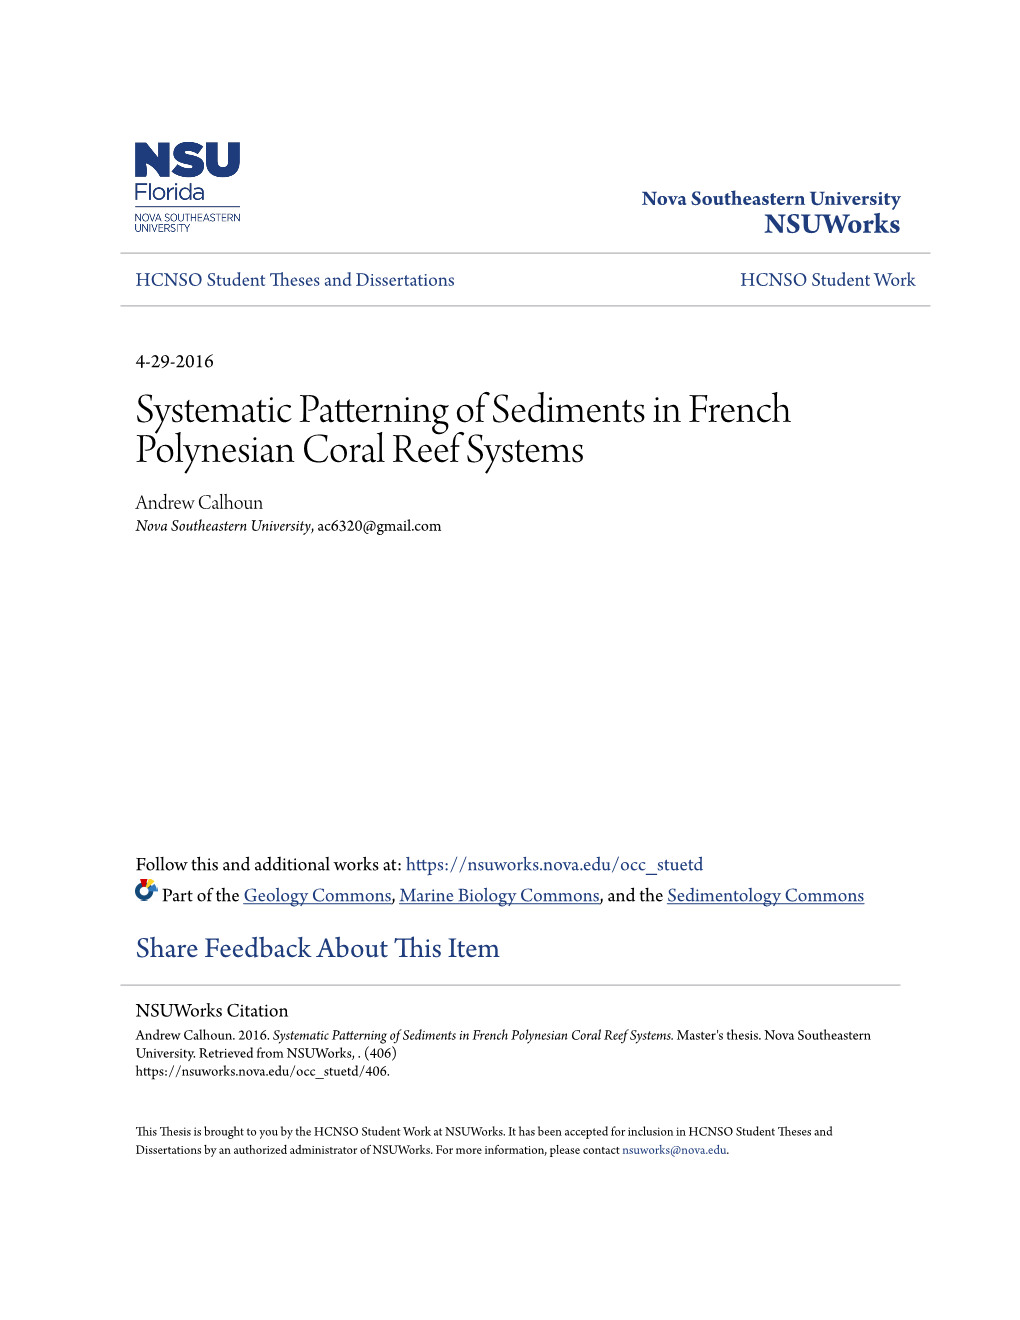 Systematic Patterning of Sediments in French Polynesian Coral Reef Systems Andrew Calhoun Nova Southeastern University, Ac6320@Gmail.Com